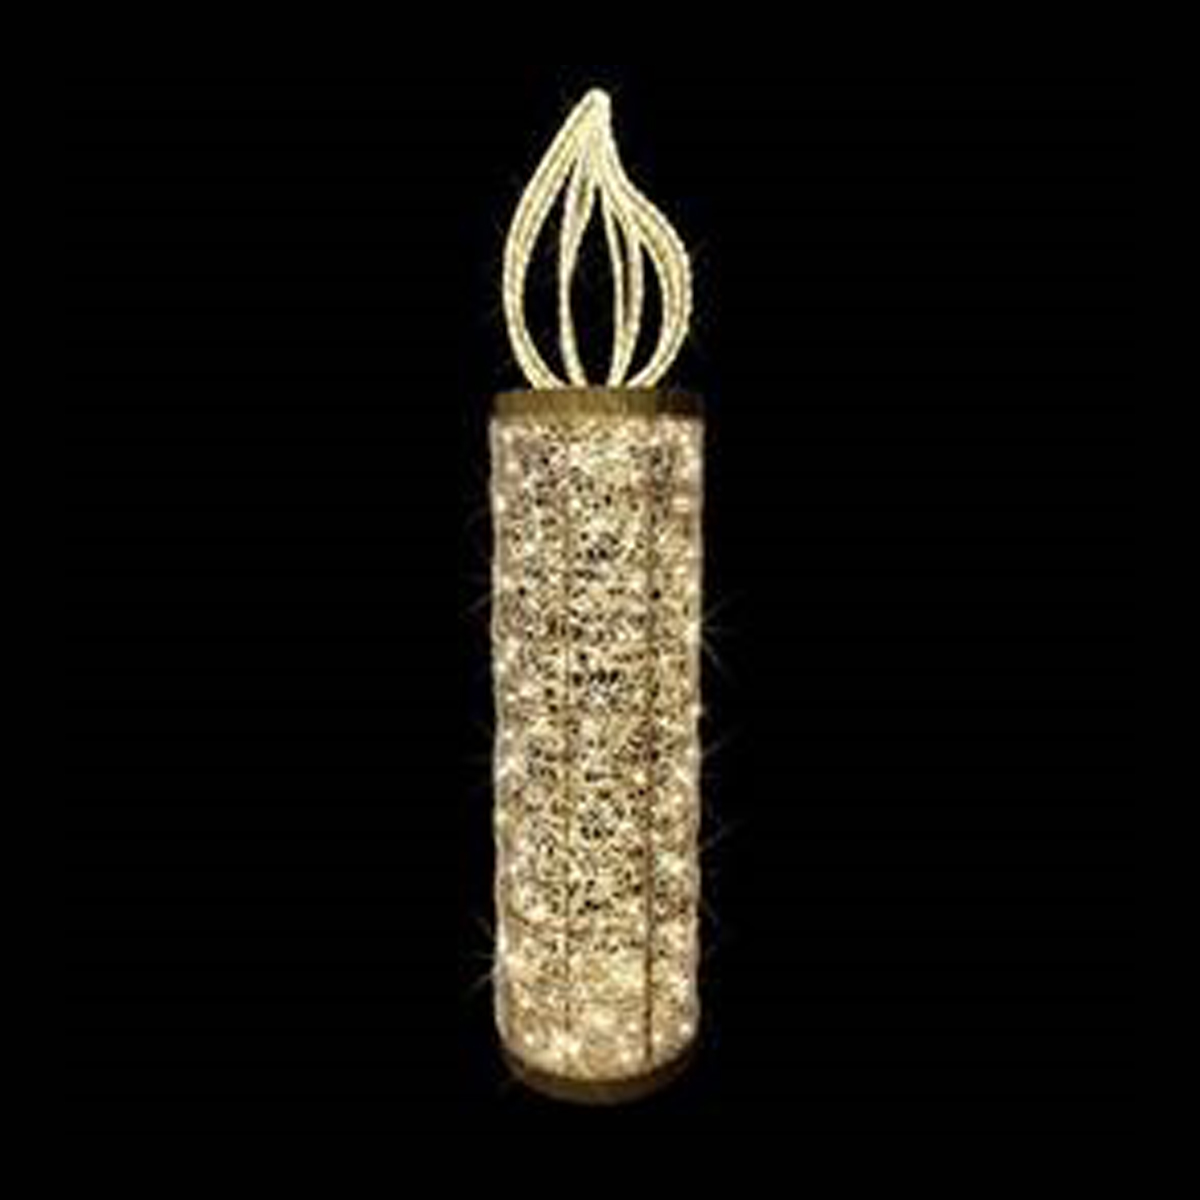 2D Candle - Christmas Display - Warm White LED - Medium - 6.5ft tall